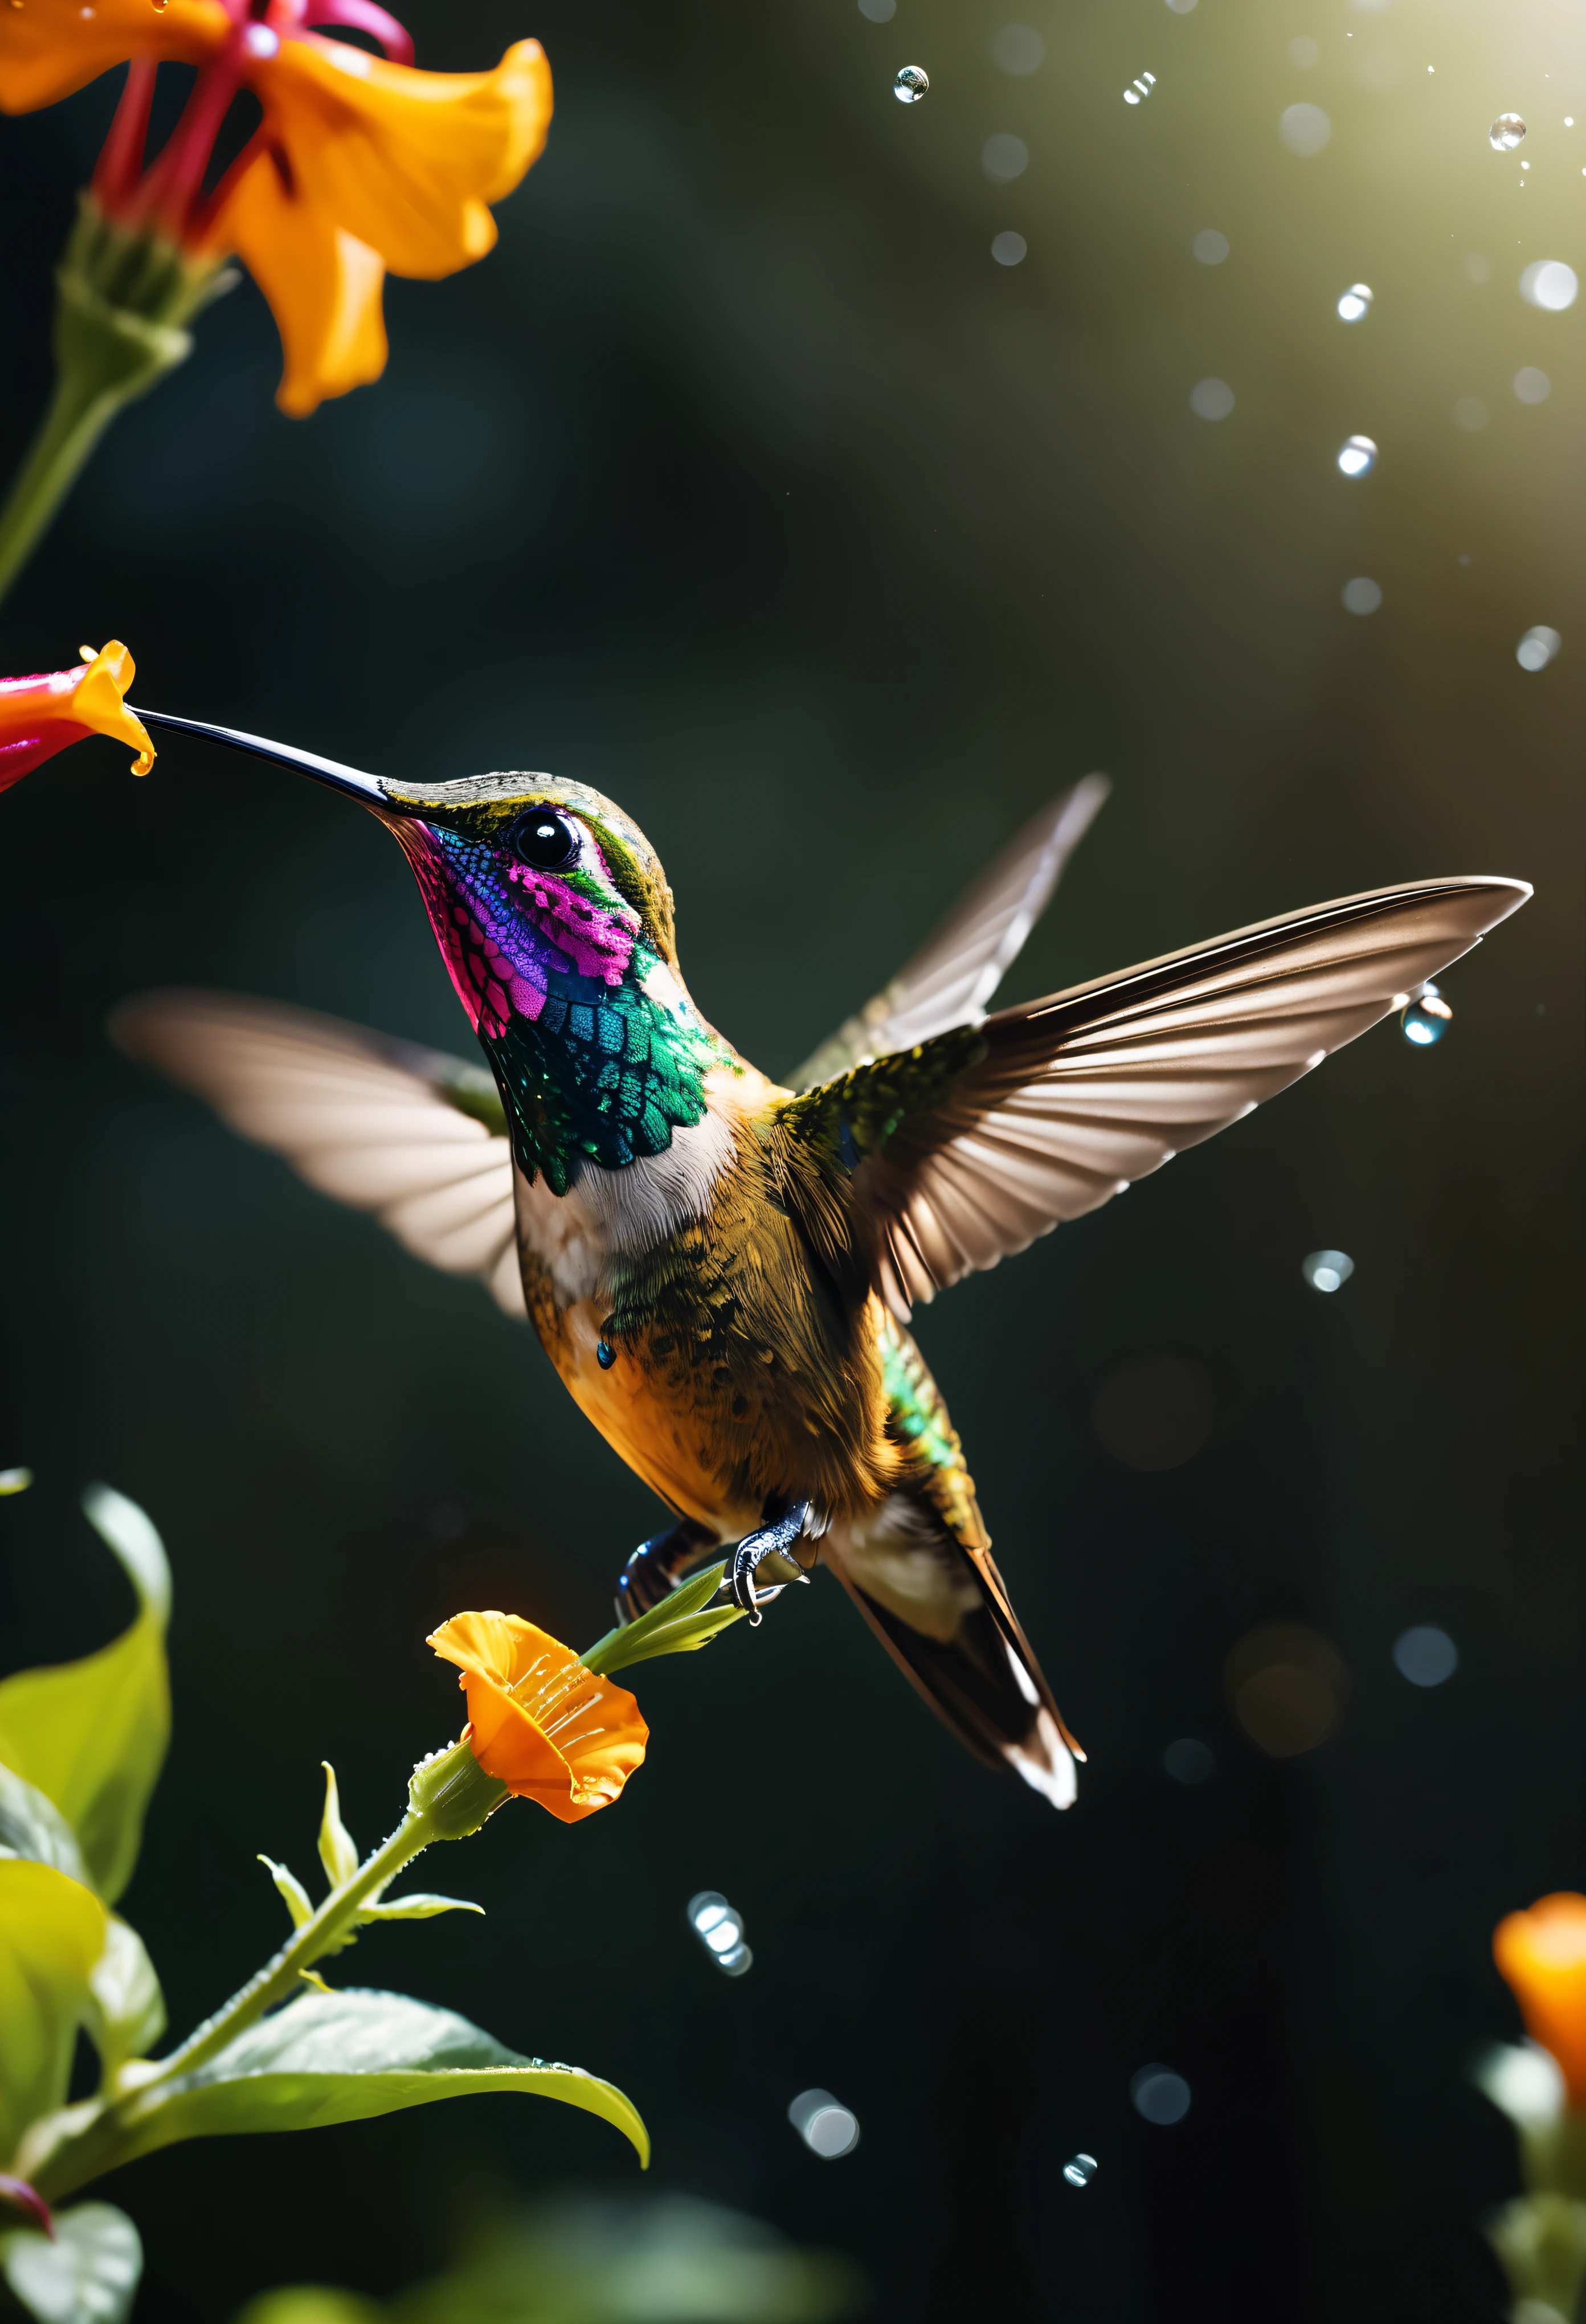 ((Masterpiece in maximum 16K resolution):1.6),((soft_color_photograpy:)1.5), ((Ultra-Detailed):1.4),((Movie-like still images and dynamic angles):1.3), ((motion blur):1.2) | (Macro shot cinematic photo of a Exotic Hummingbird at a flower), (hummingbird wrist flick), (macro lens), (pollen), (dewdrops), (shimmer), (visual experience) ,(Realism), (Realistic),award-winning graphics, dark shot, film grain, extremely detailed, Digital Art, rtx, Unreal Engine, scene concept anti glare effect, All captured with sharp focus.
